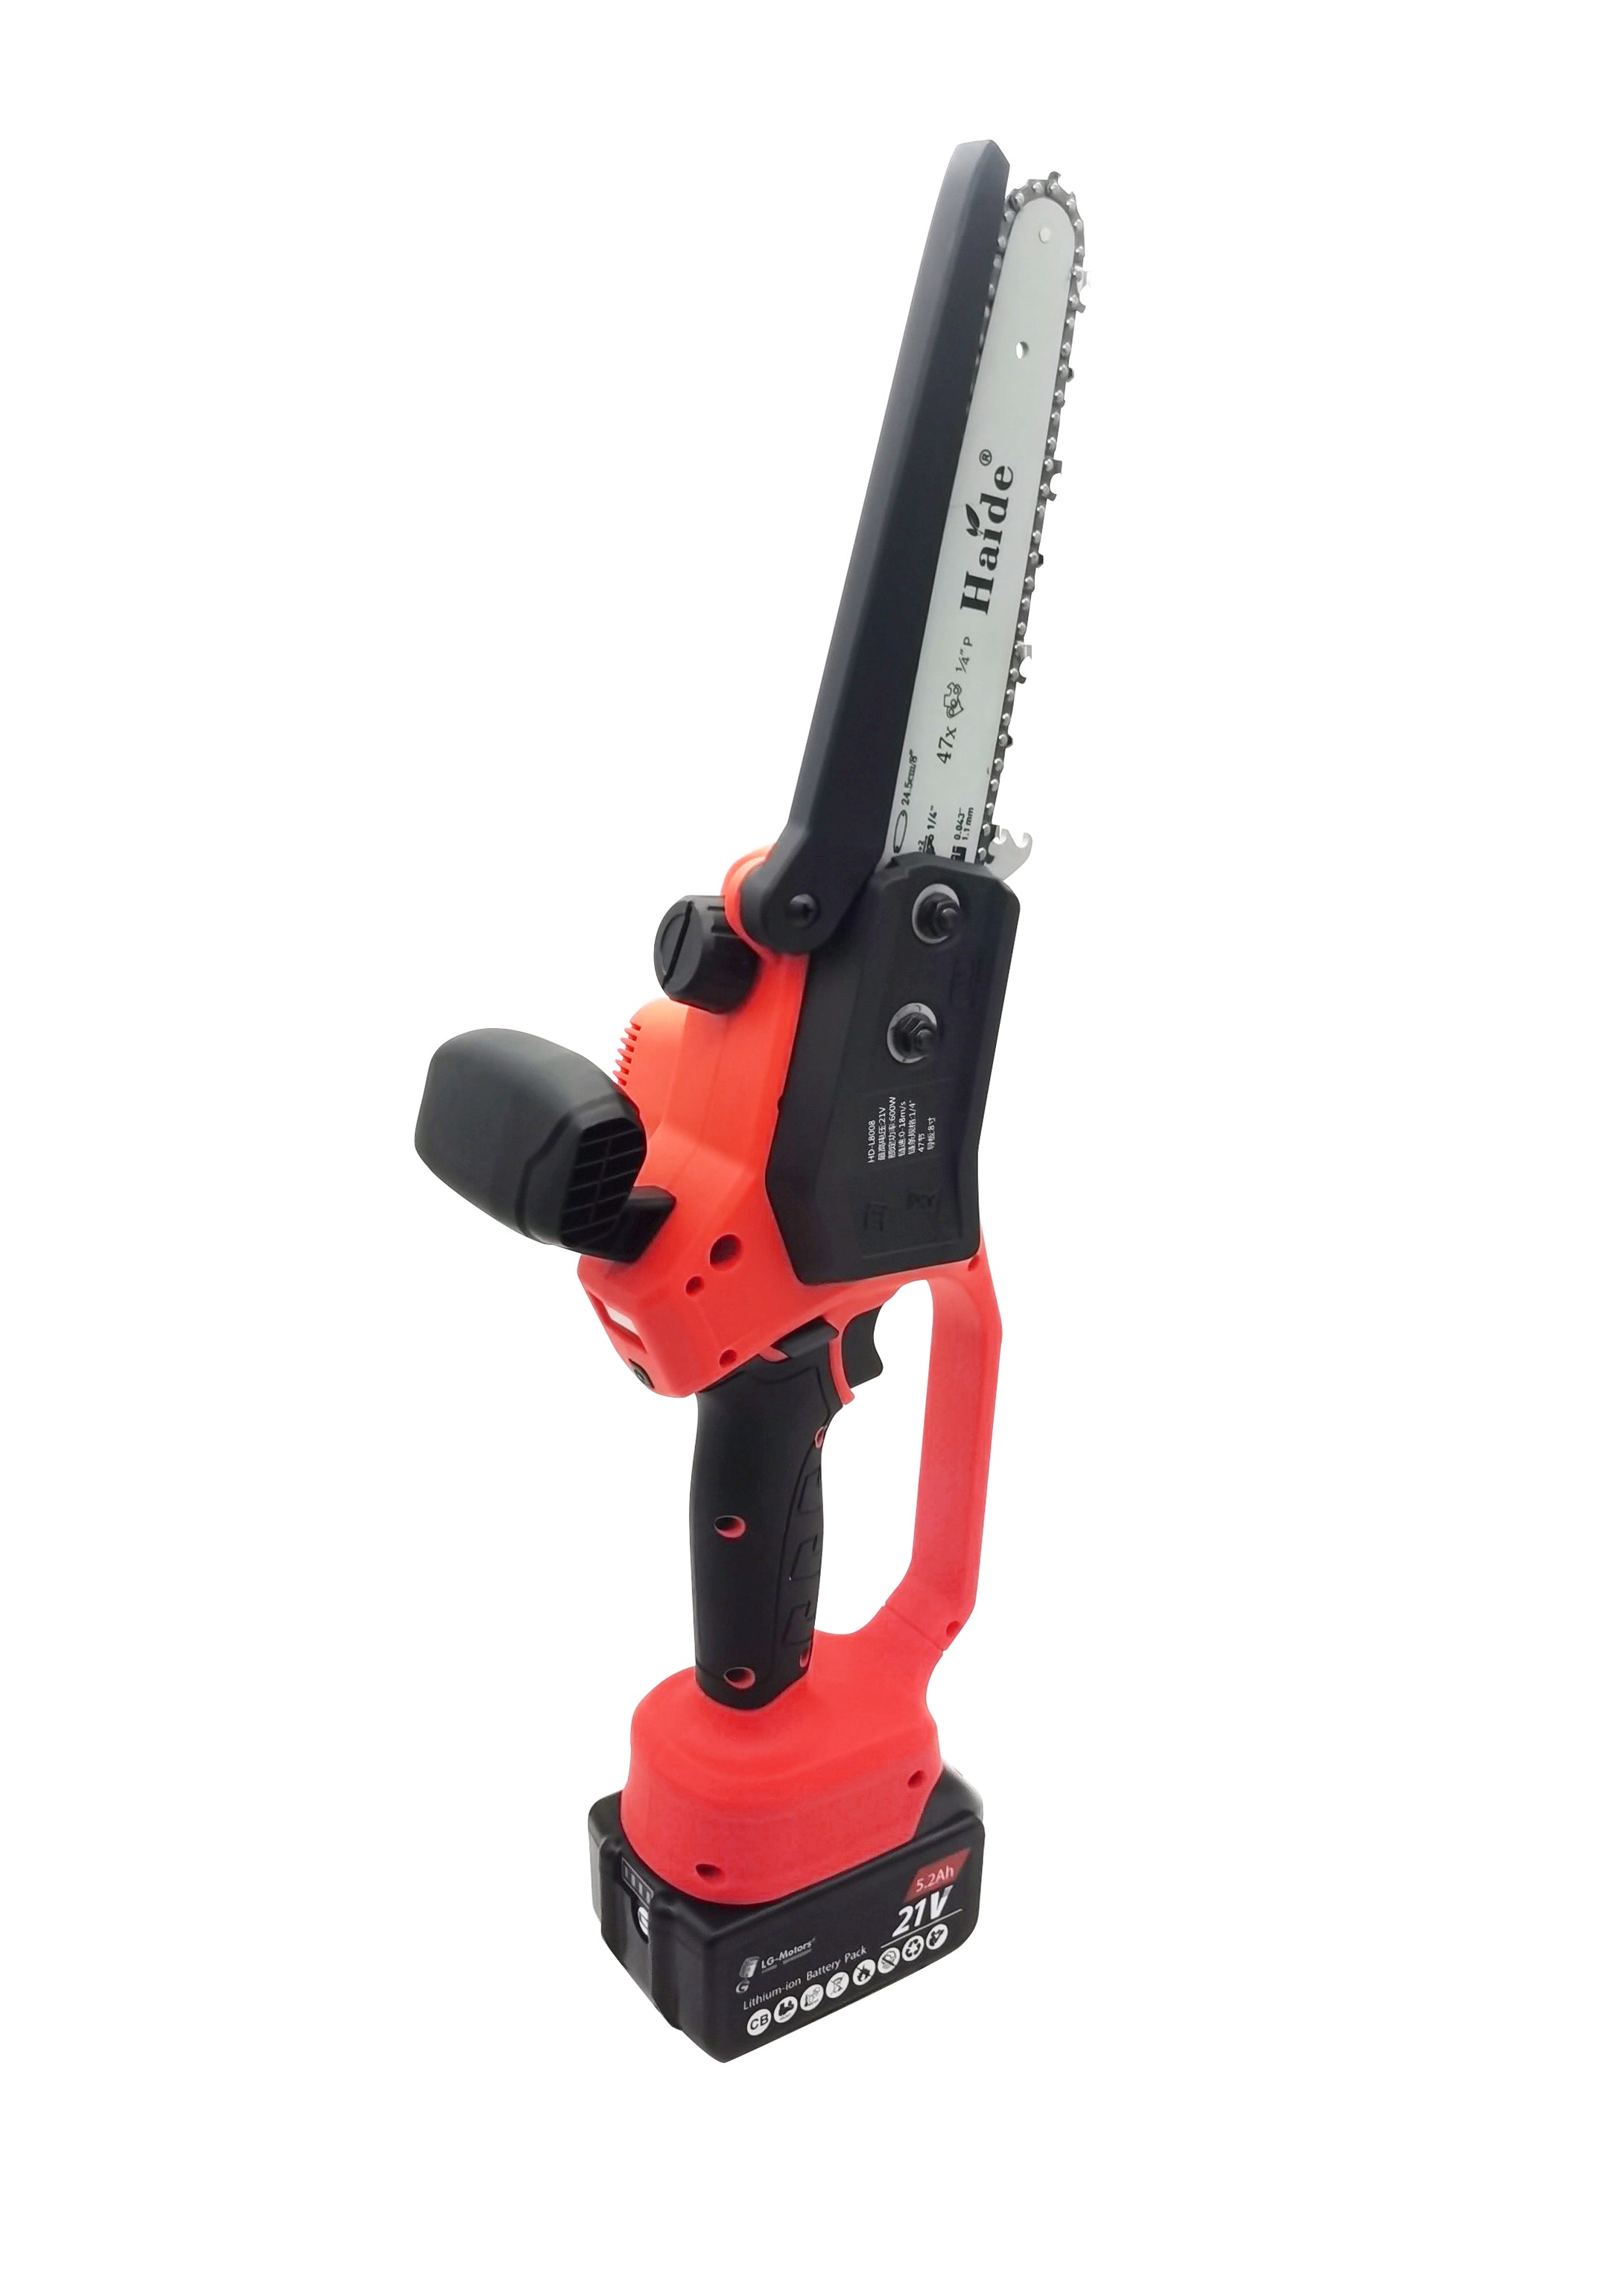 knkpower [24946] LITHIUM BATTERY PRUNER SAW 7